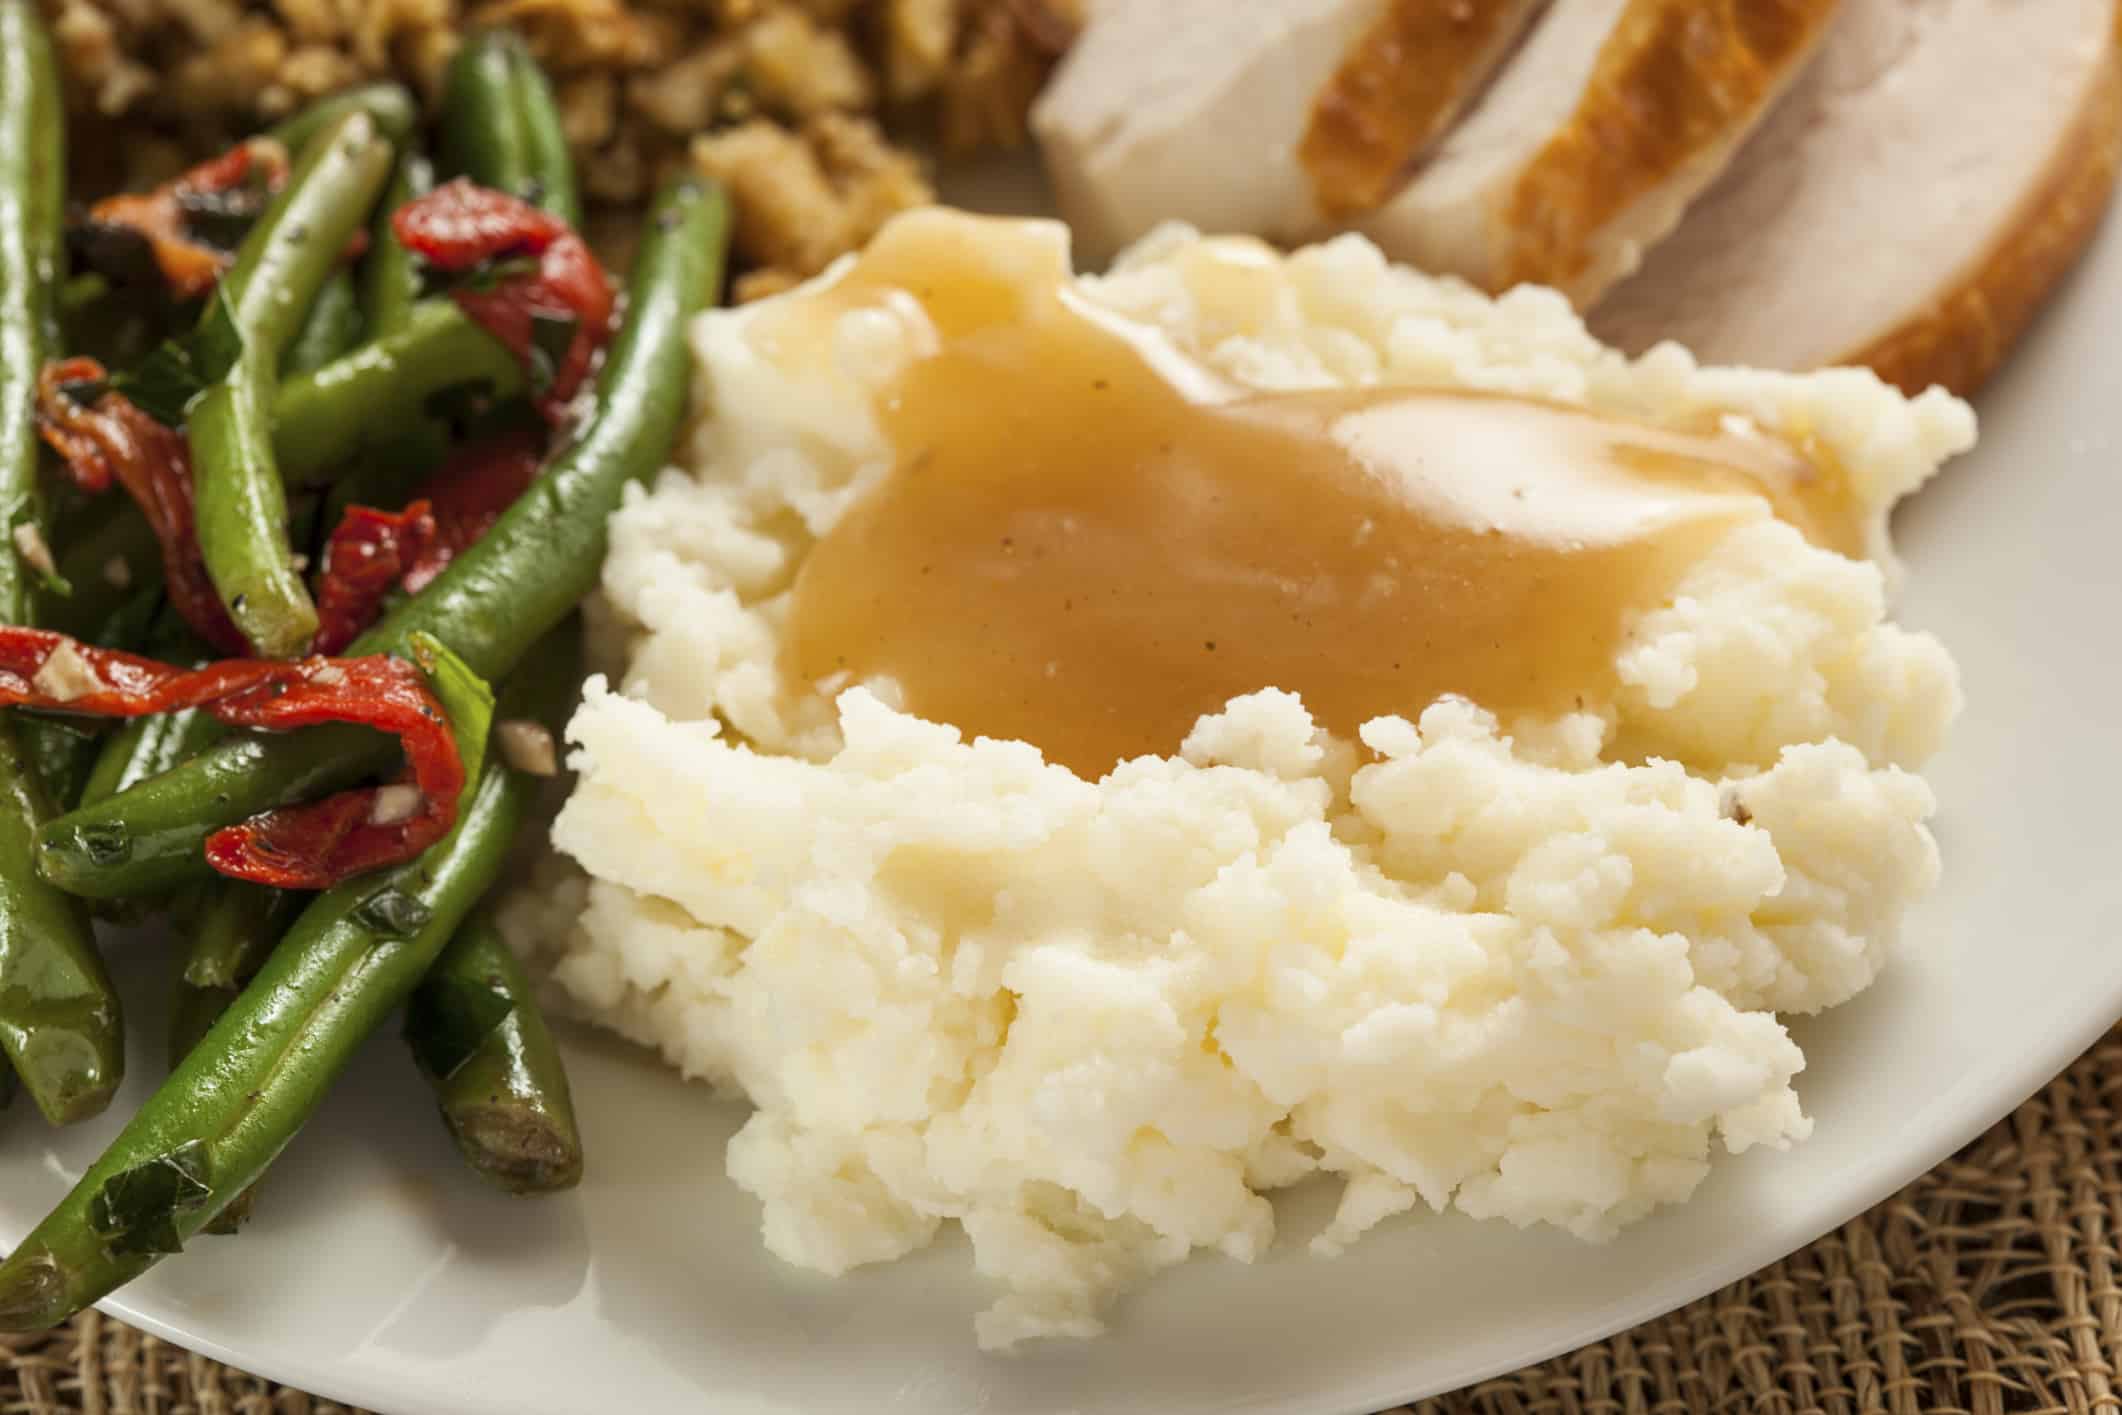 Image of mashed potatoes with gravy